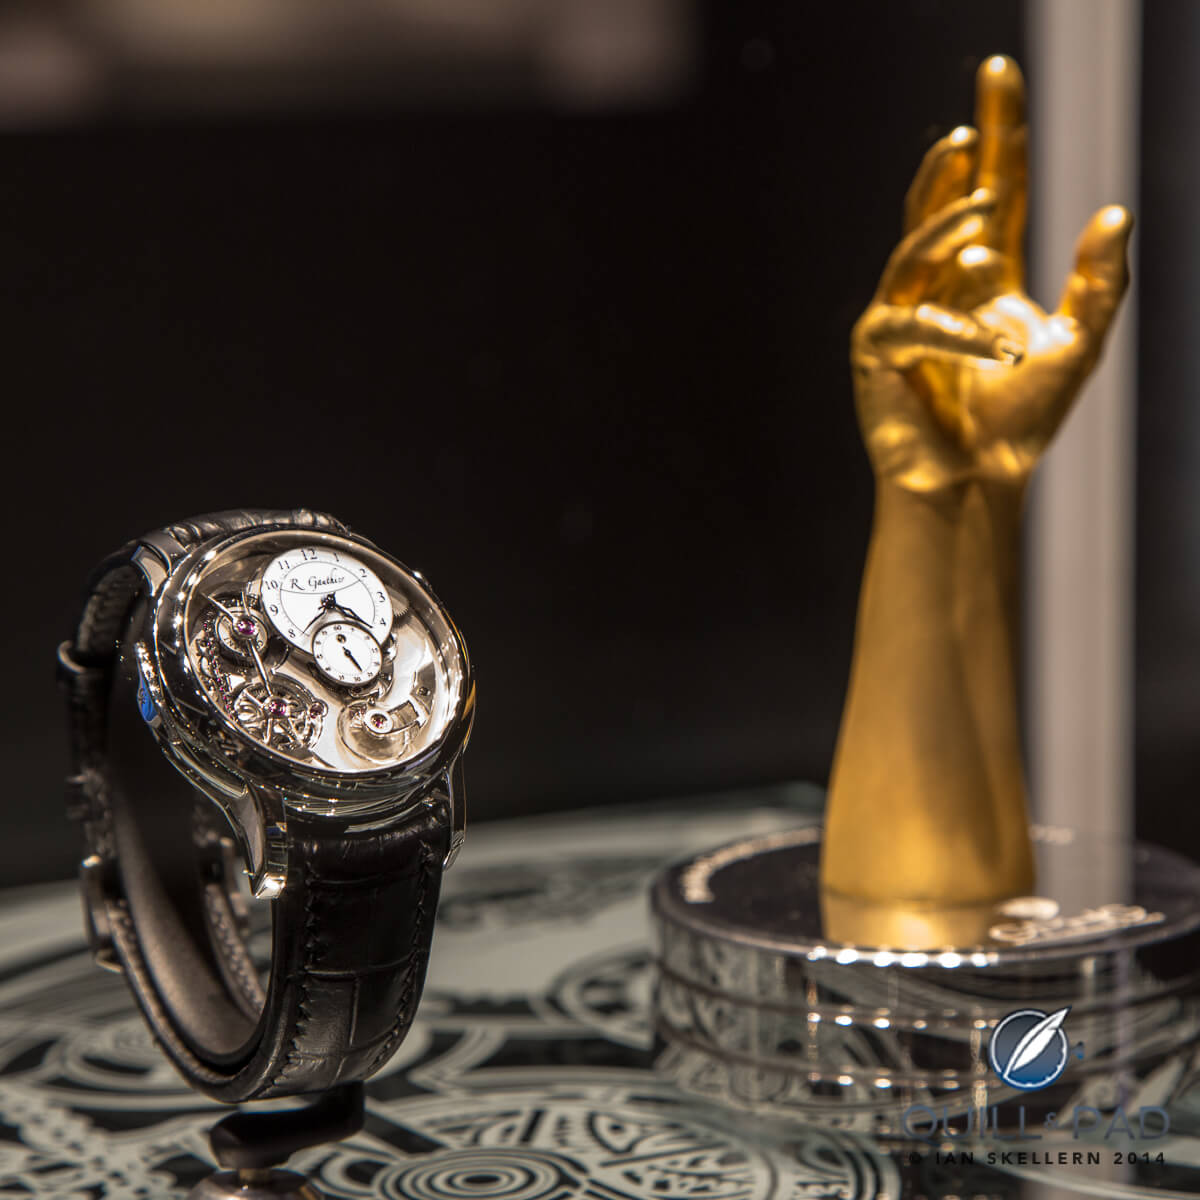 Romain Gauthier's award-winning Logical one with Golden Hand prize